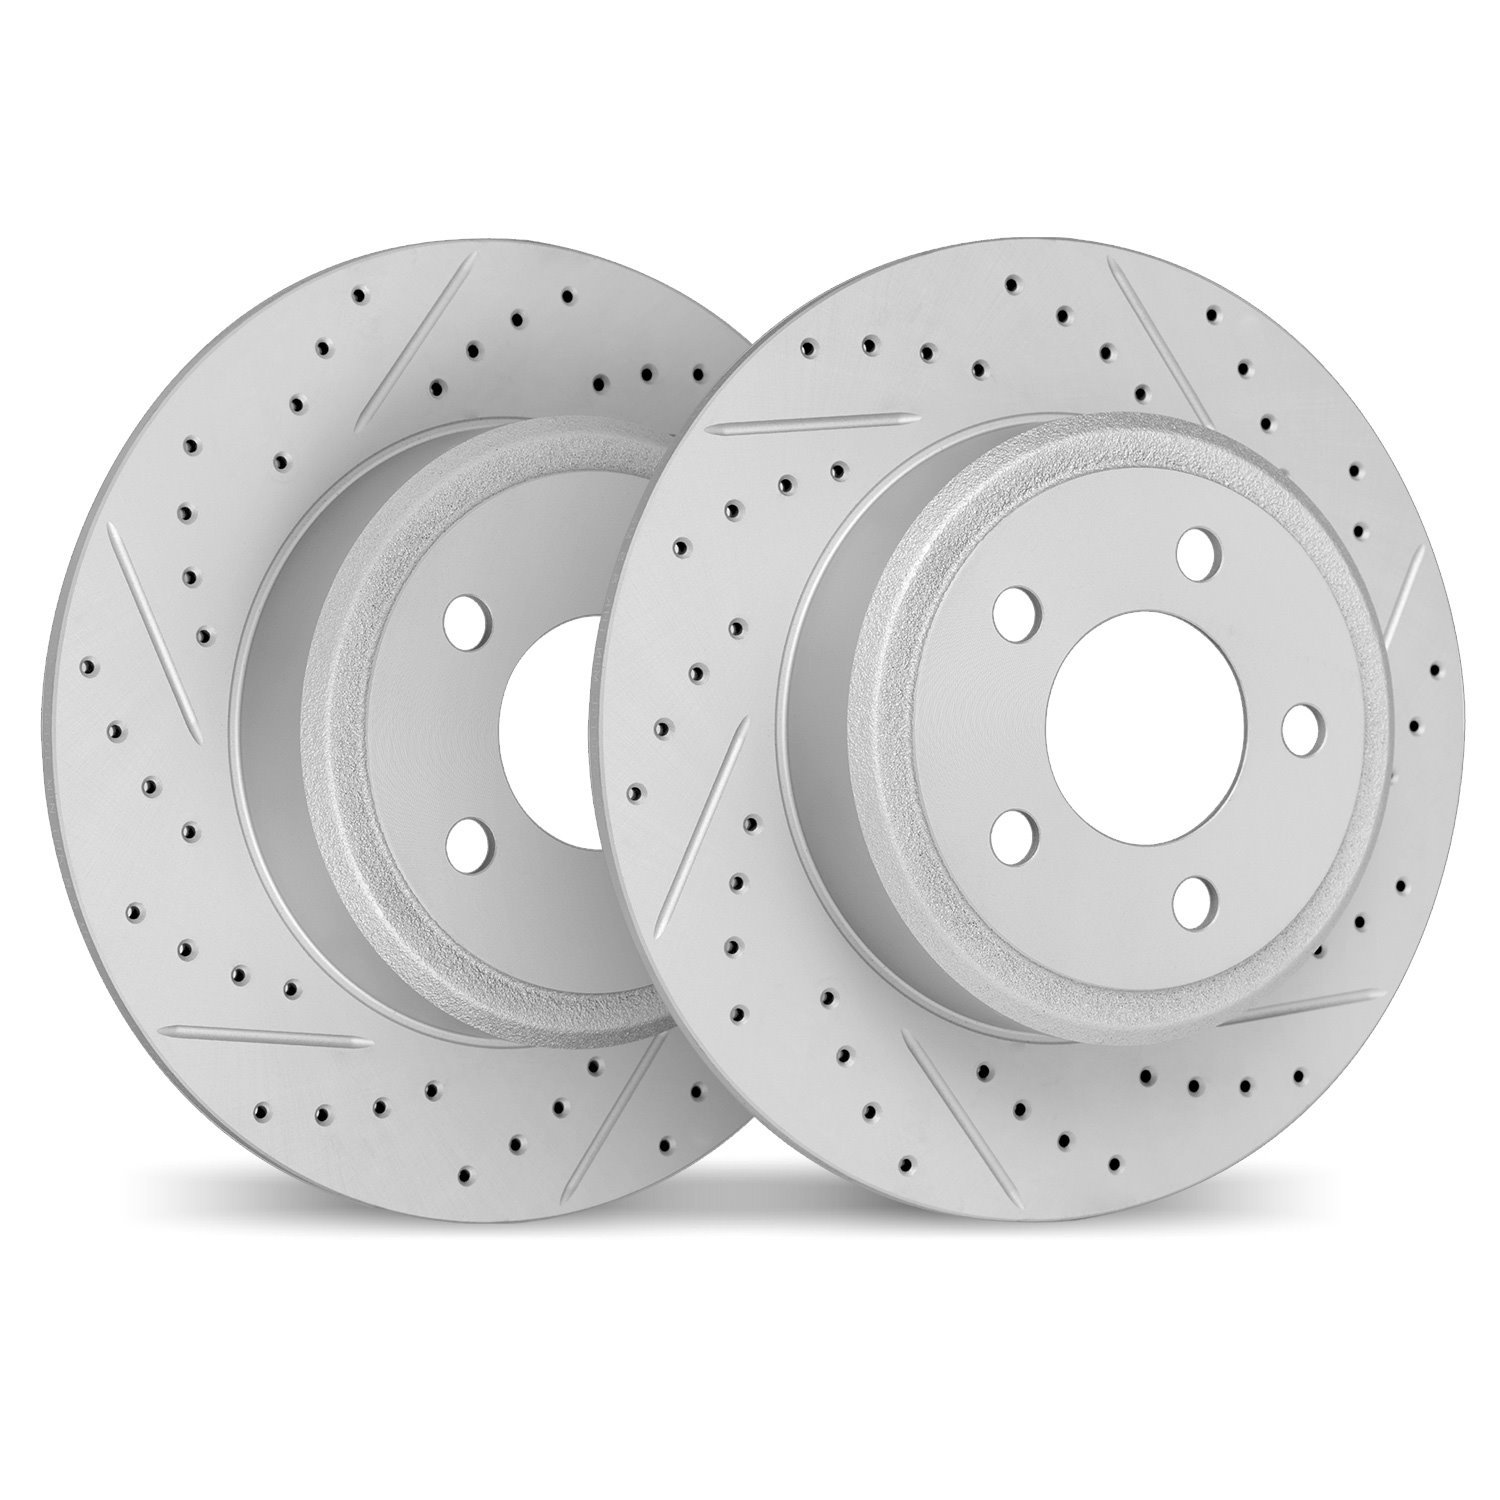 2002-80038 Geoperformance Drilled/Slotted Brake Rotors, 2016-2018 Ford/Lincoln/Mercury/Mazda, Position: Rear